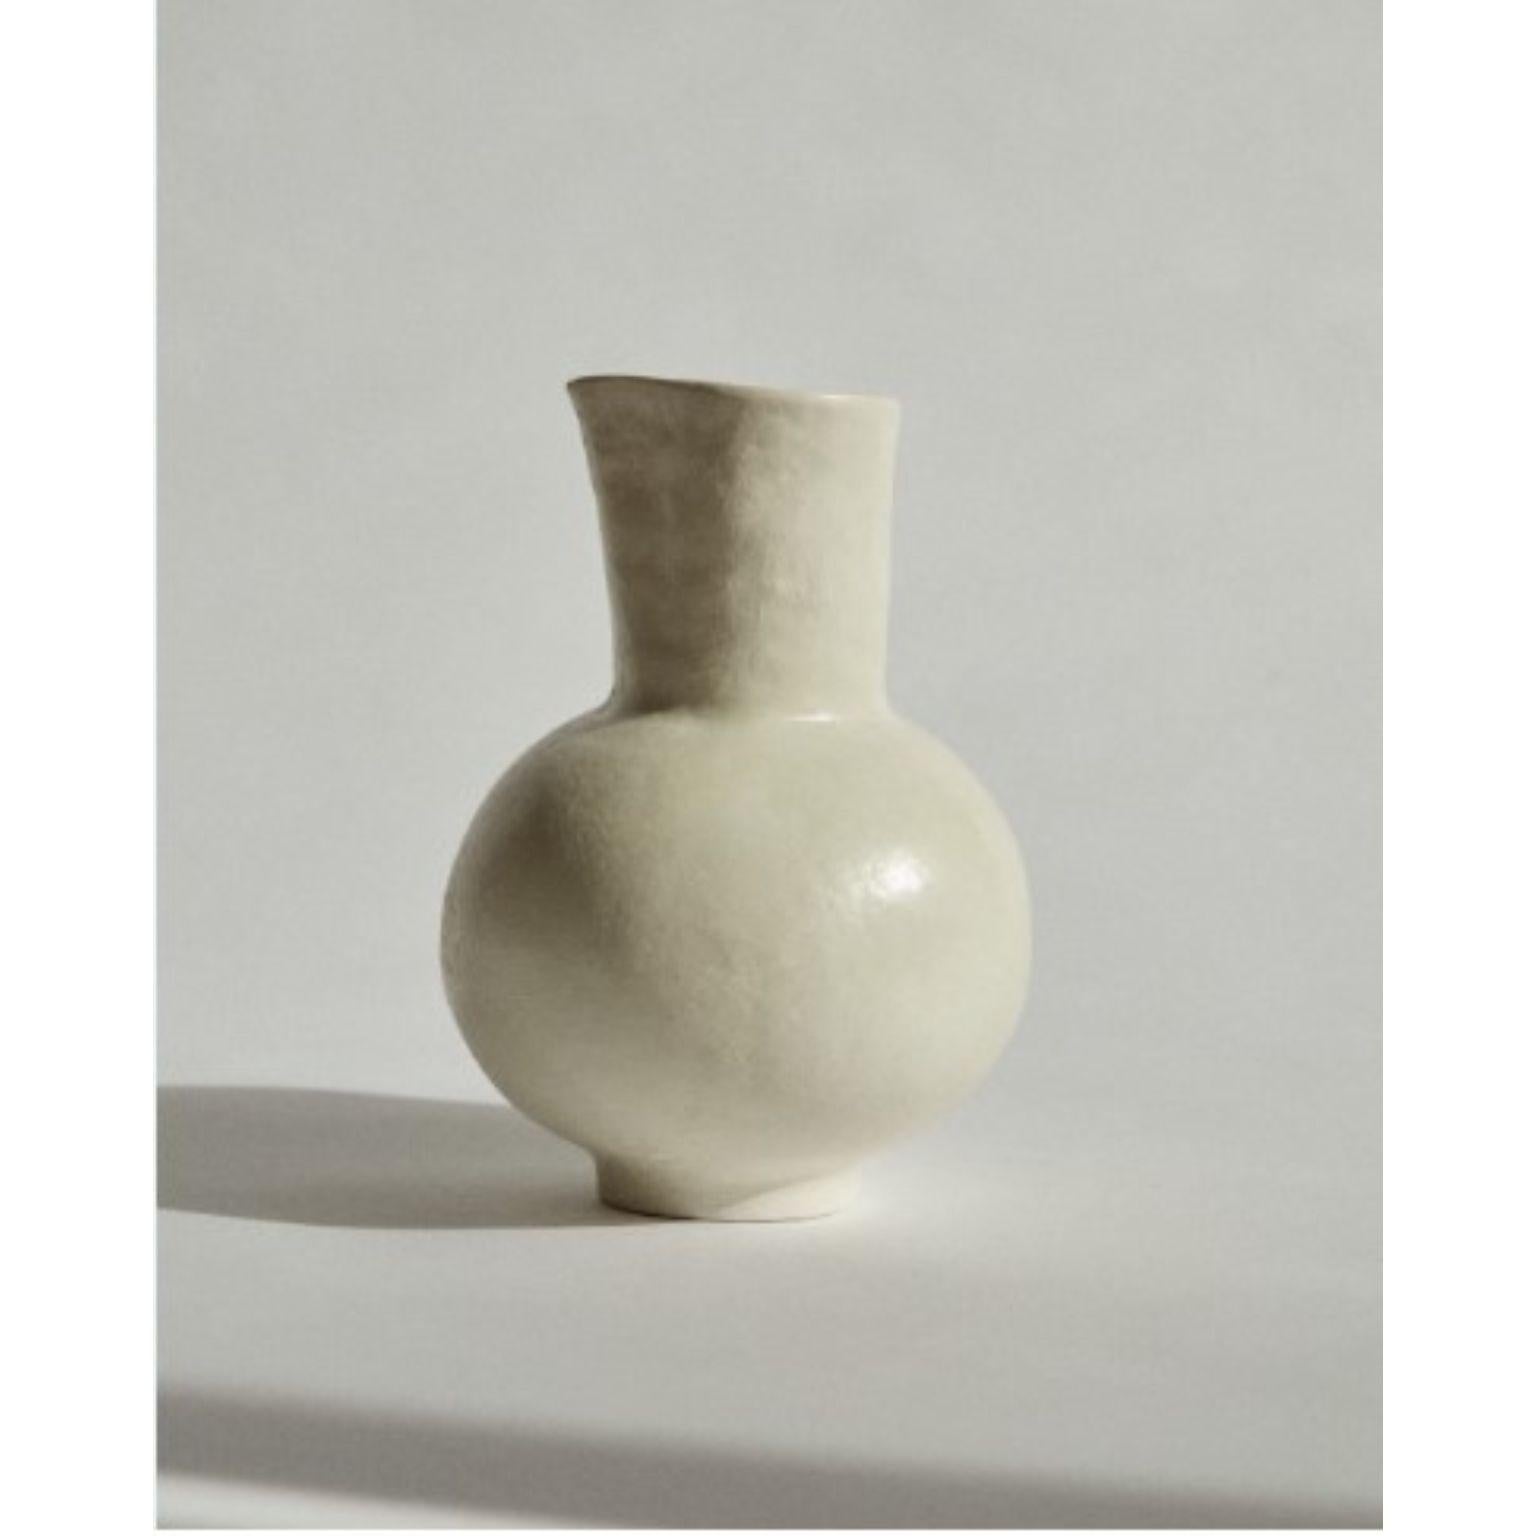 Pitcher of water in white by Marta Bonilla
Dimensions: D8 x H22 cm
Materials: Terracotta, clay
Pitcher of water in white: Water jug modelled by hand enamelled in a satin white.
Marta Bonilla designs and creates her pieces in Barcelona, where her